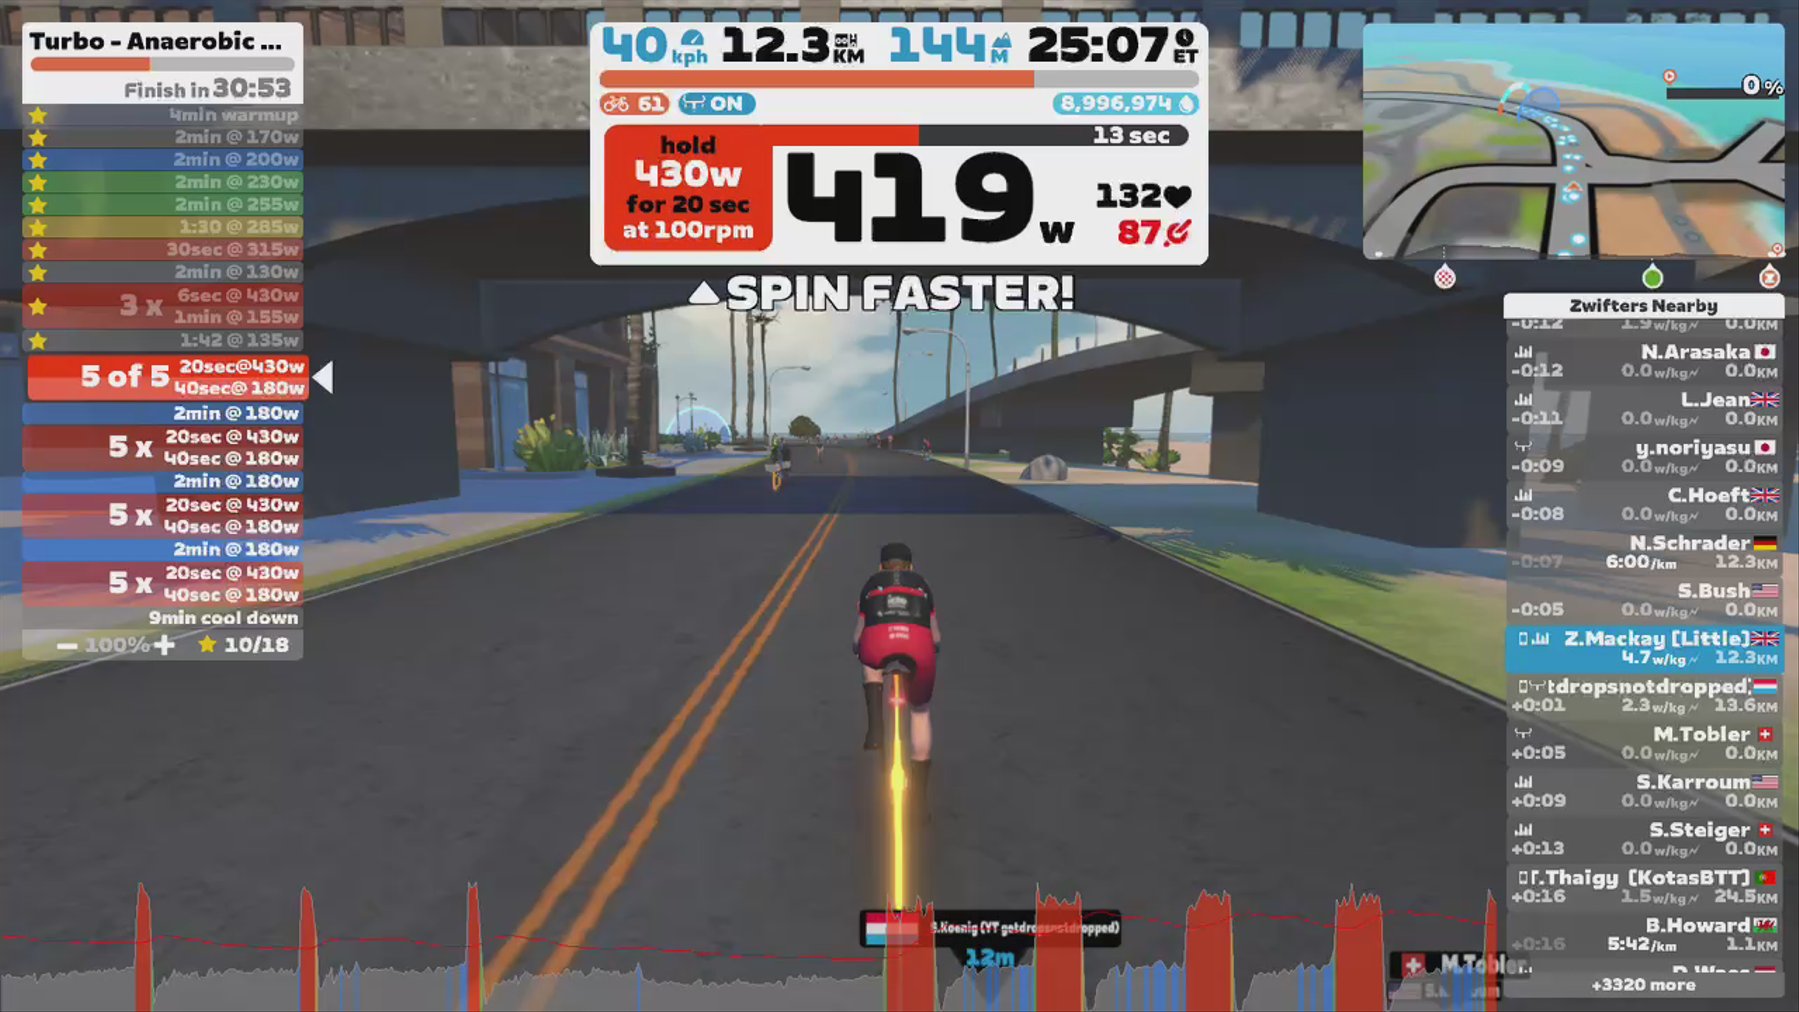 Zwift - Turbo - Anaerobic Capacity Intervals (20 sec) ST in Watopia